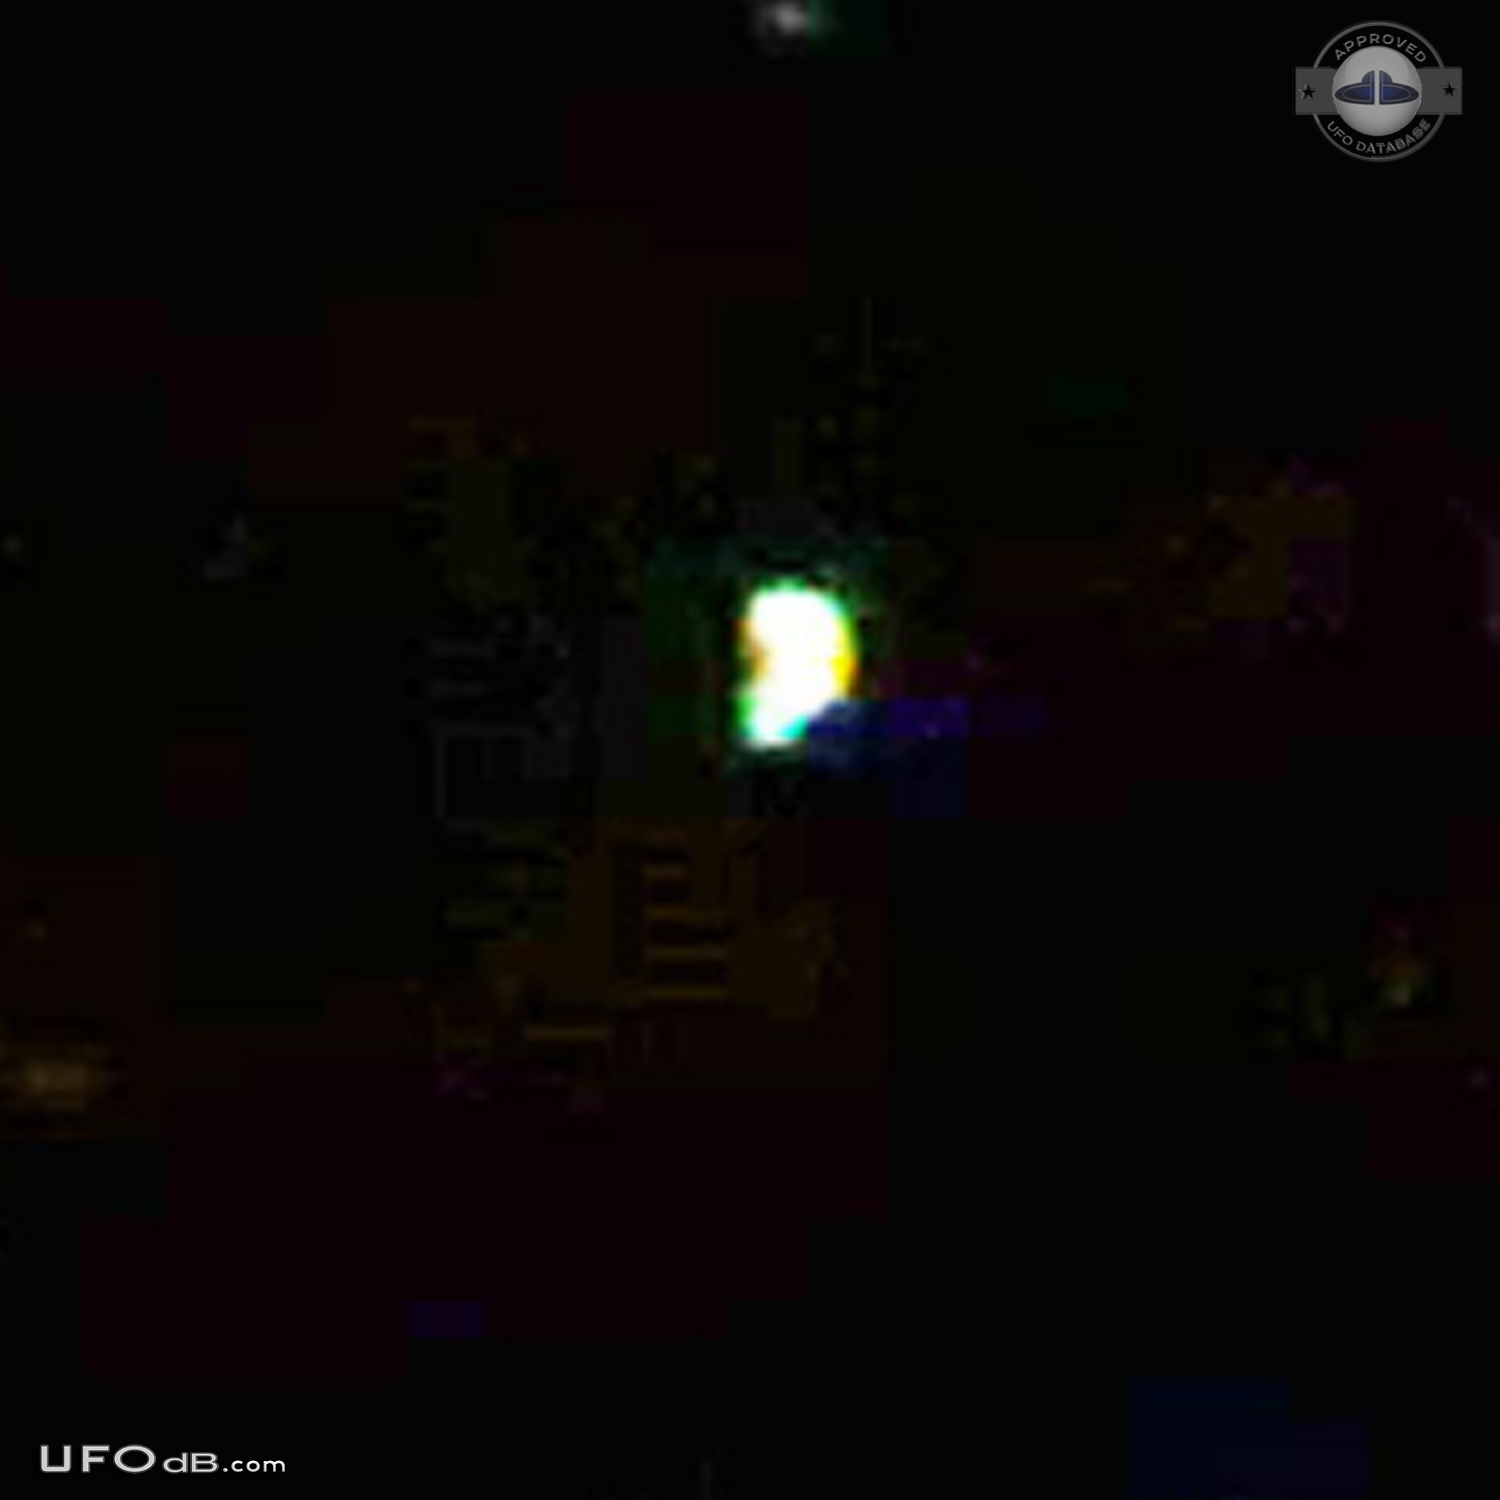 Incredible UFO sighting with pictures & details - Troyan Bulgaria 2010 UFO Picture #464-3